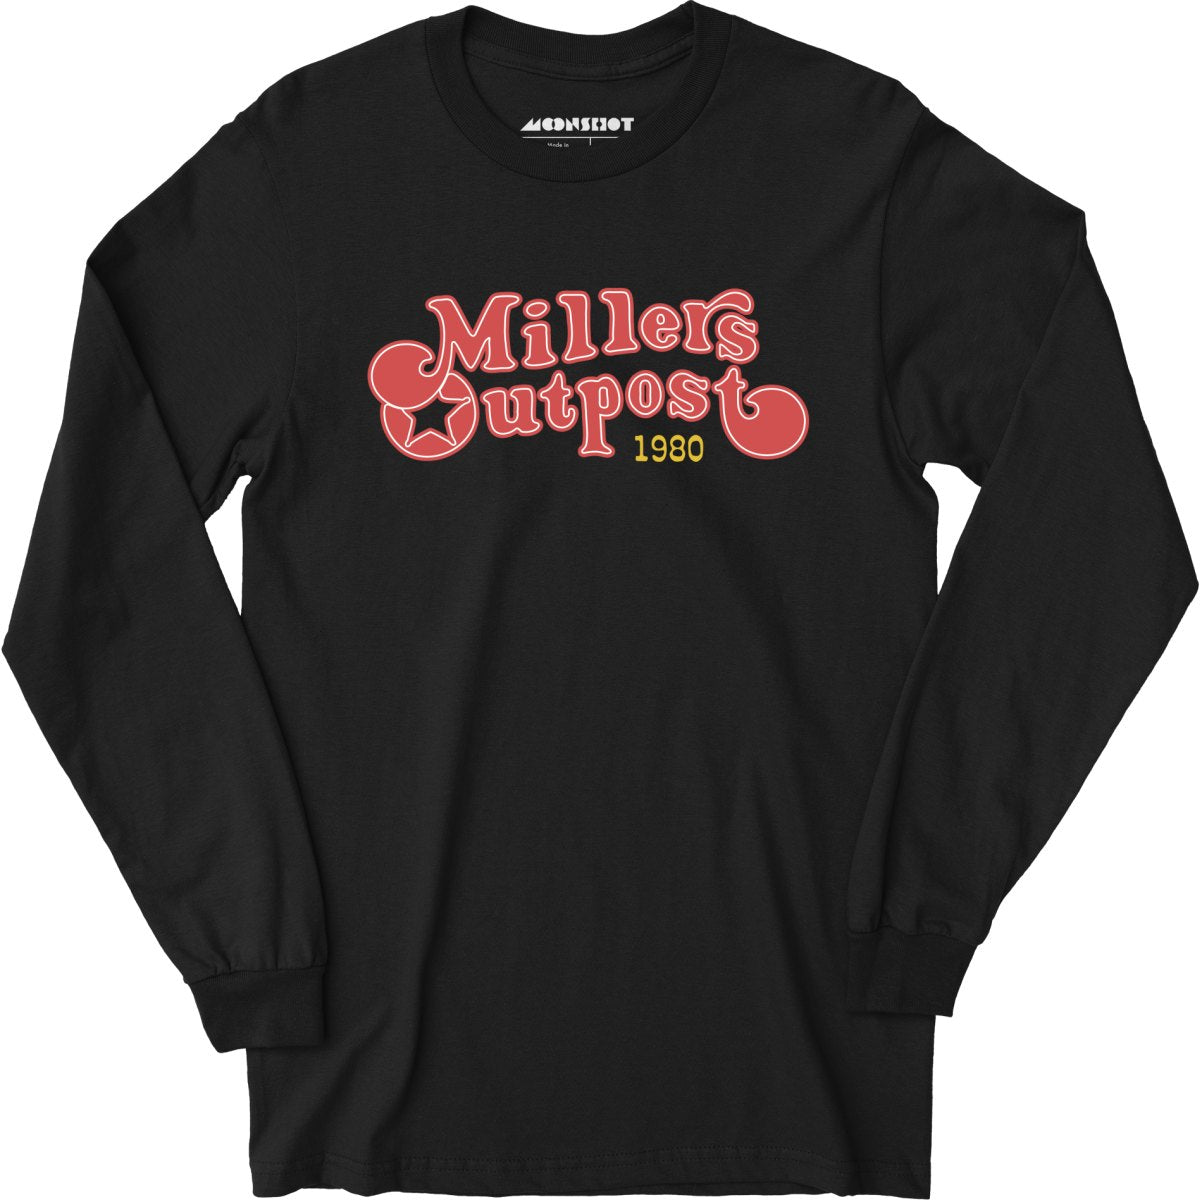 Millers Outpost - Long Sleeve T-Shirt